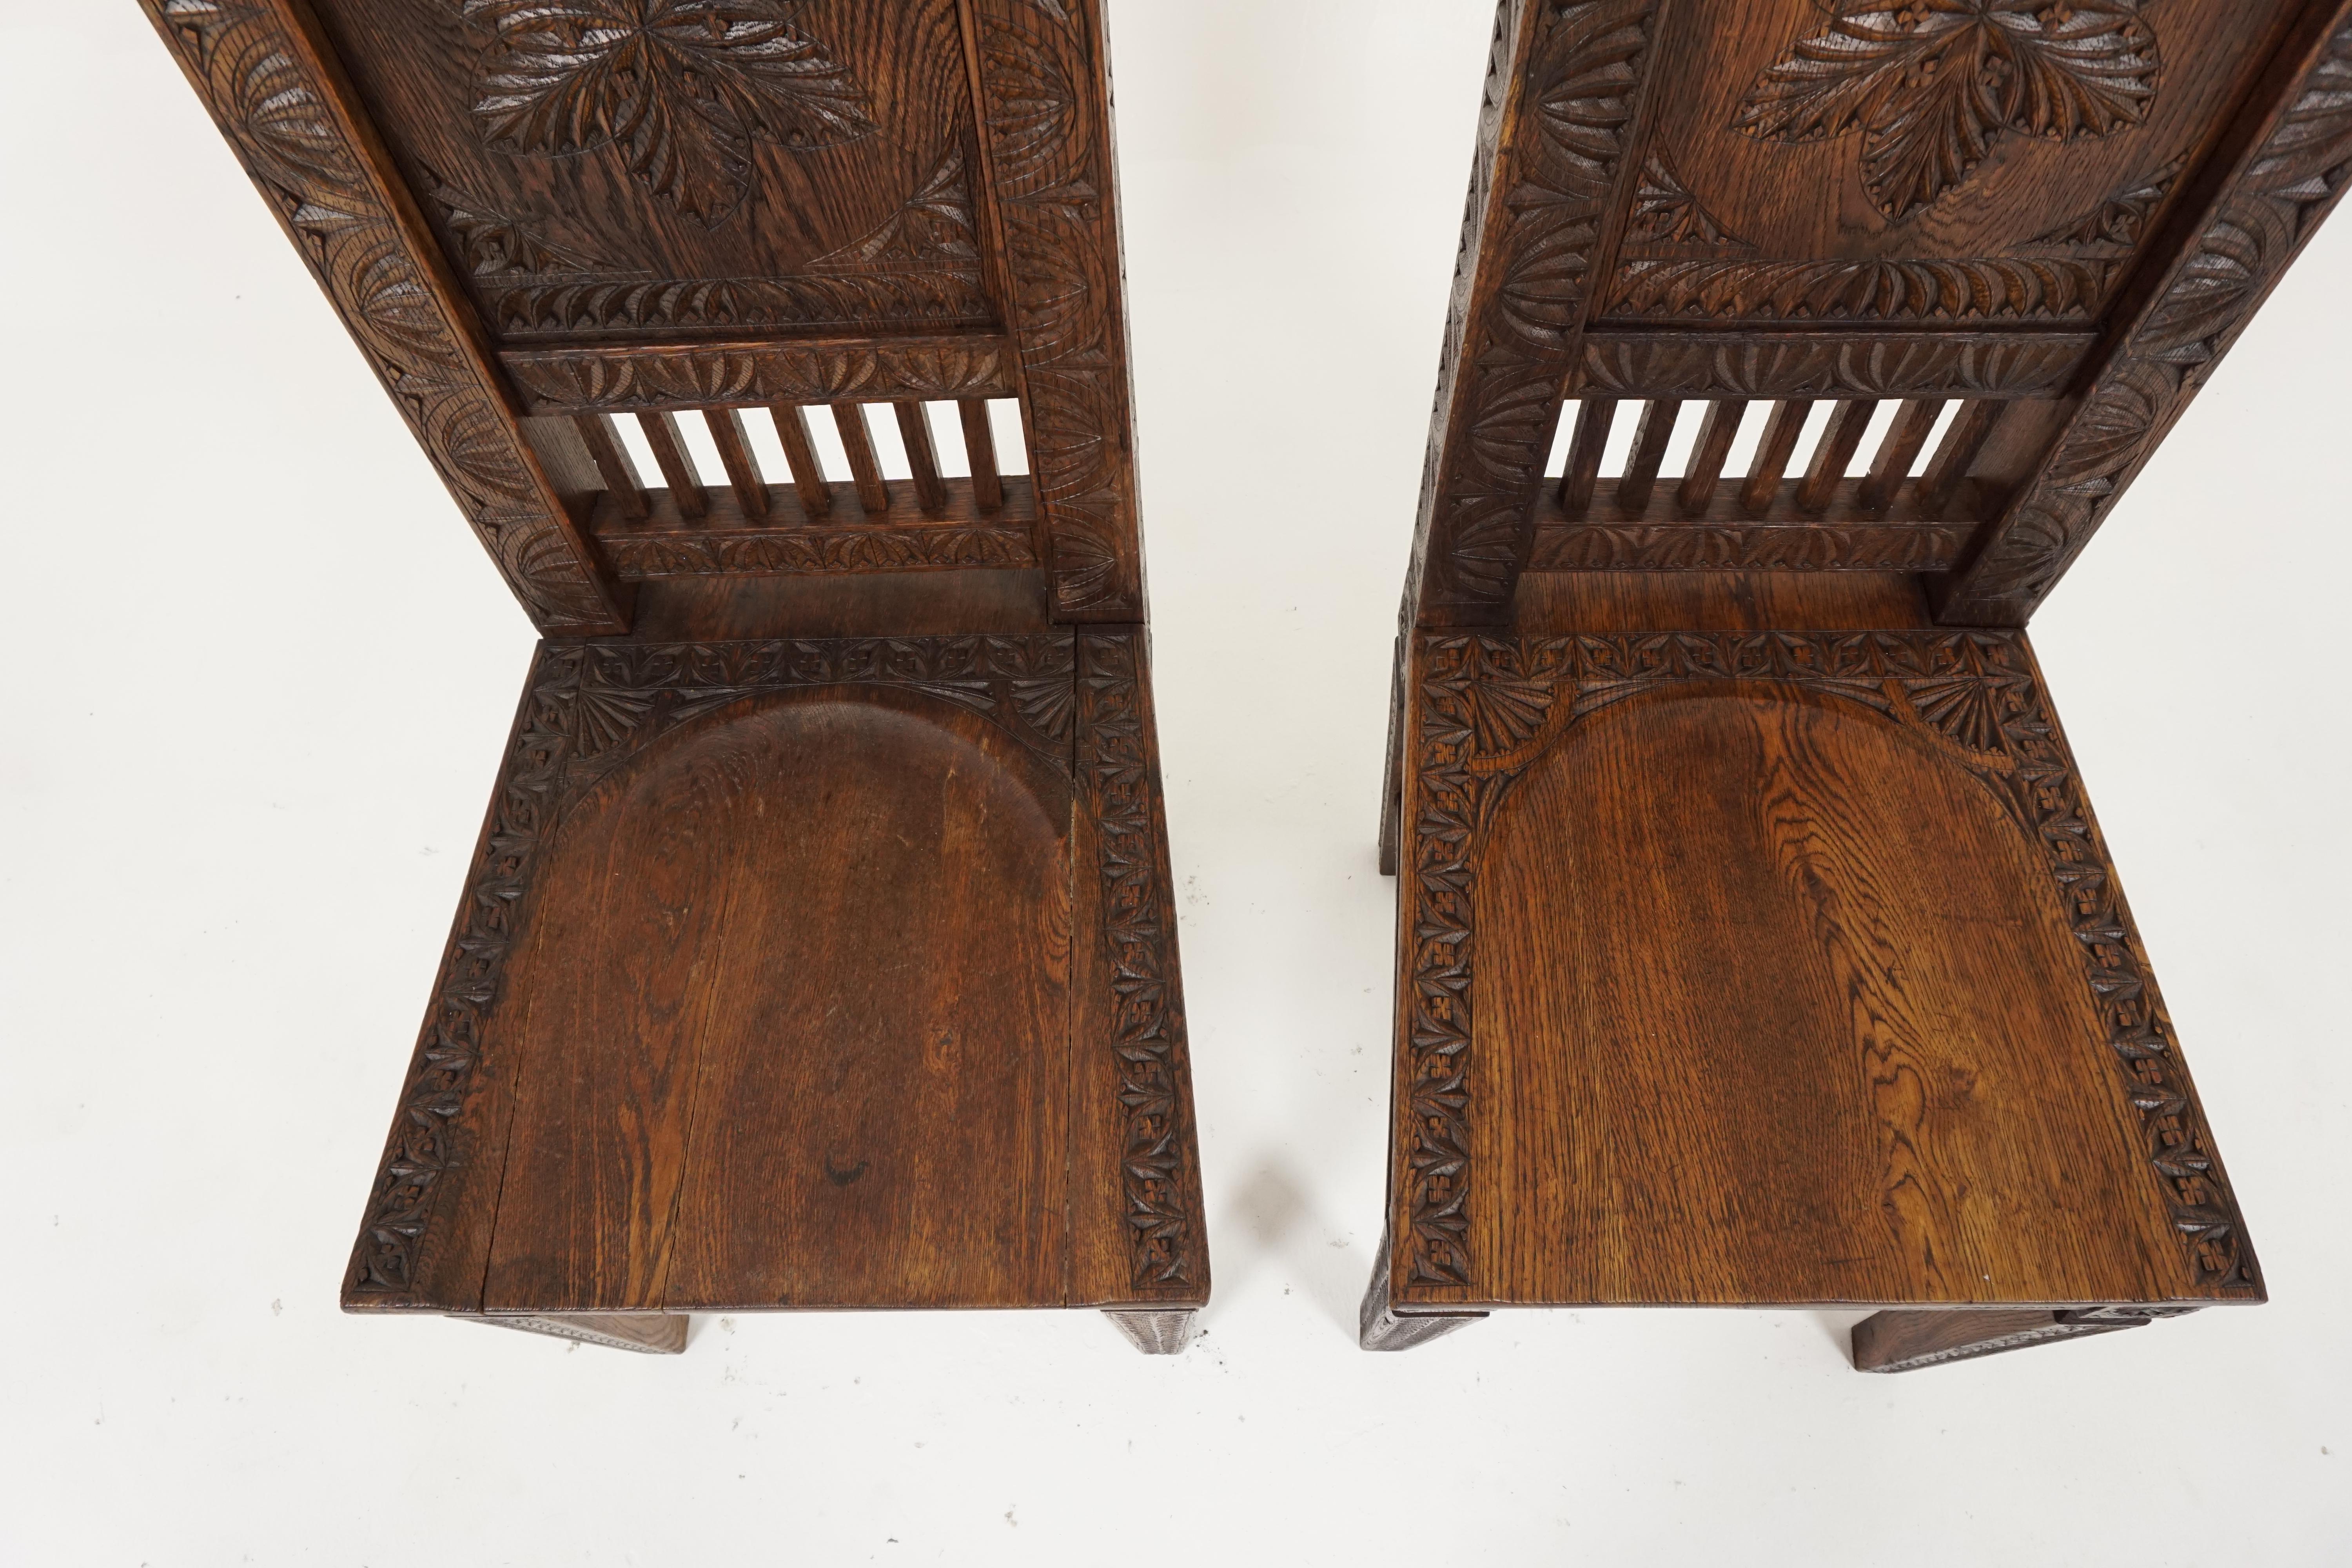 Pair of Antique Oak Chairs, Heavily Carved Hall Chairs with Chip Carving, Antique Furniture, Scotland 1890, B1807

Scotland 1890
Solid Oak
Original Finish
Carved Panel Back
Carved Supports with Finials to the Top
Solid Oak Seat with Carved